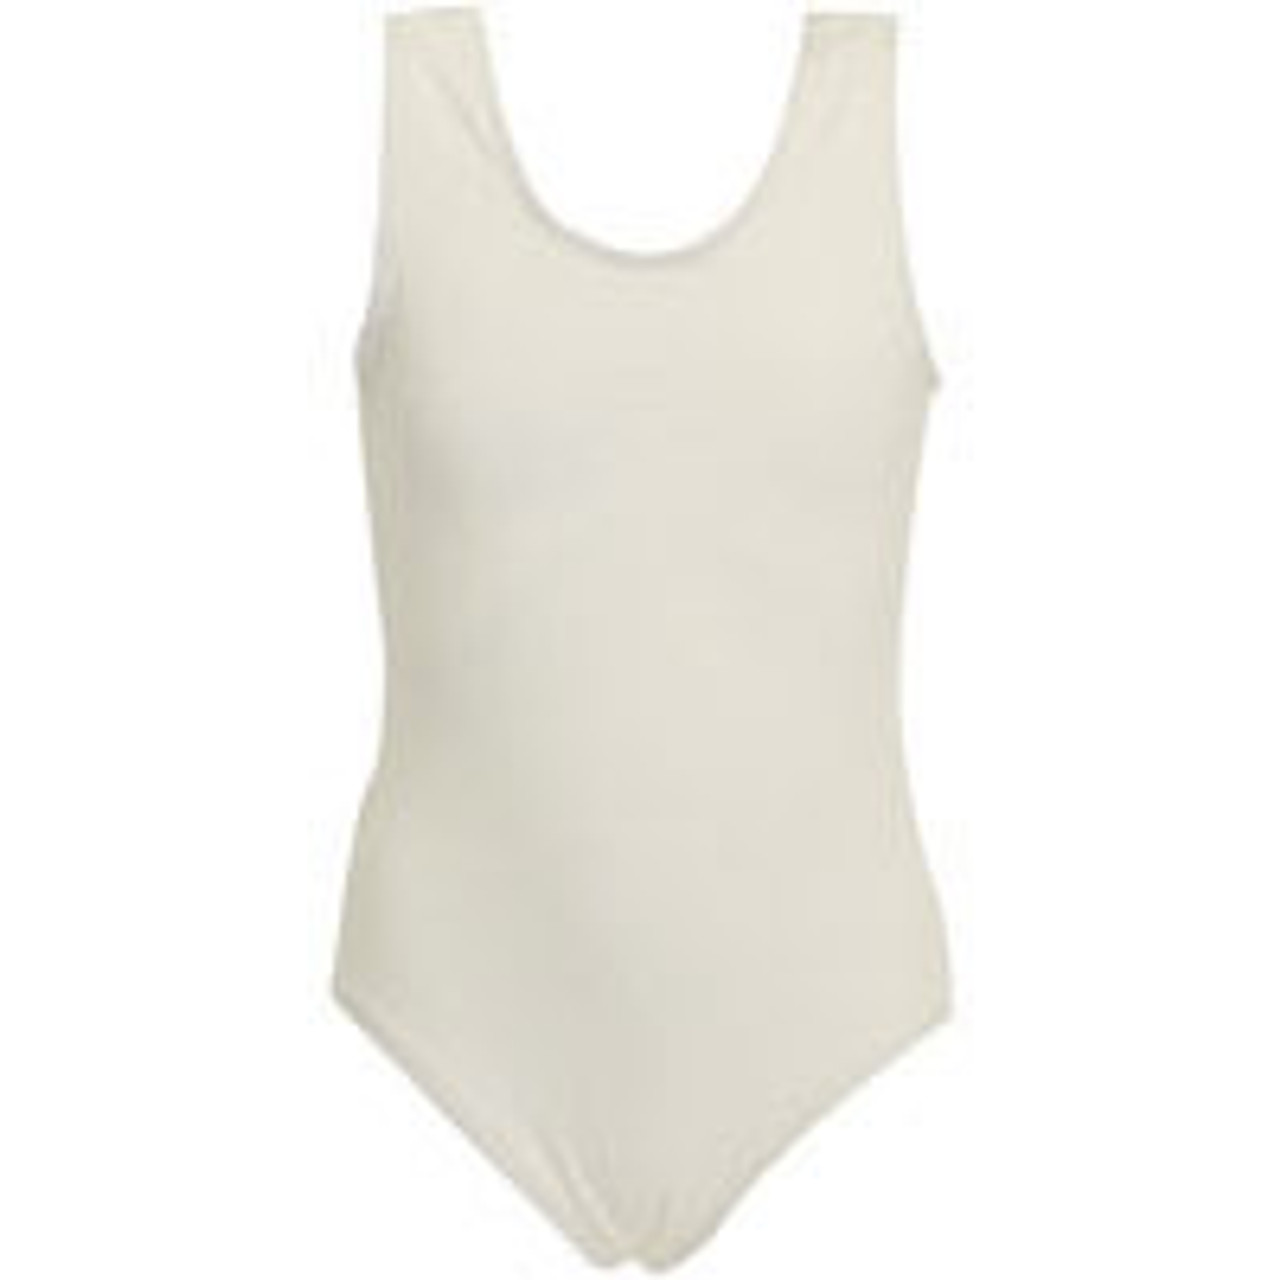 Black Leotard Adult 3340-3342 - Private Island Party